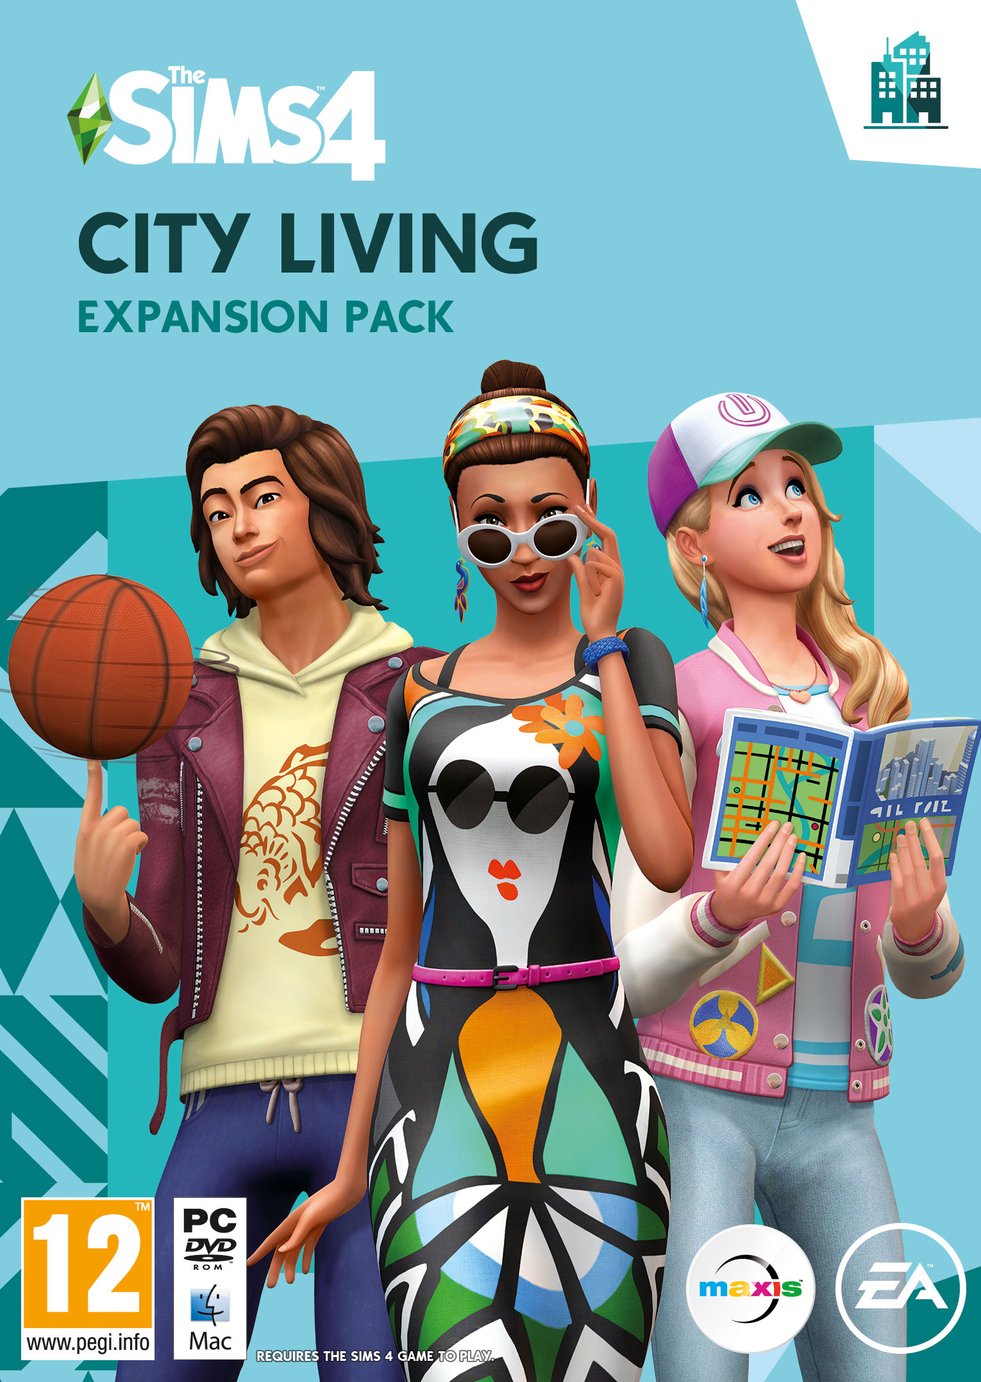 The Sims - 4 City Living- PC Game Reviews